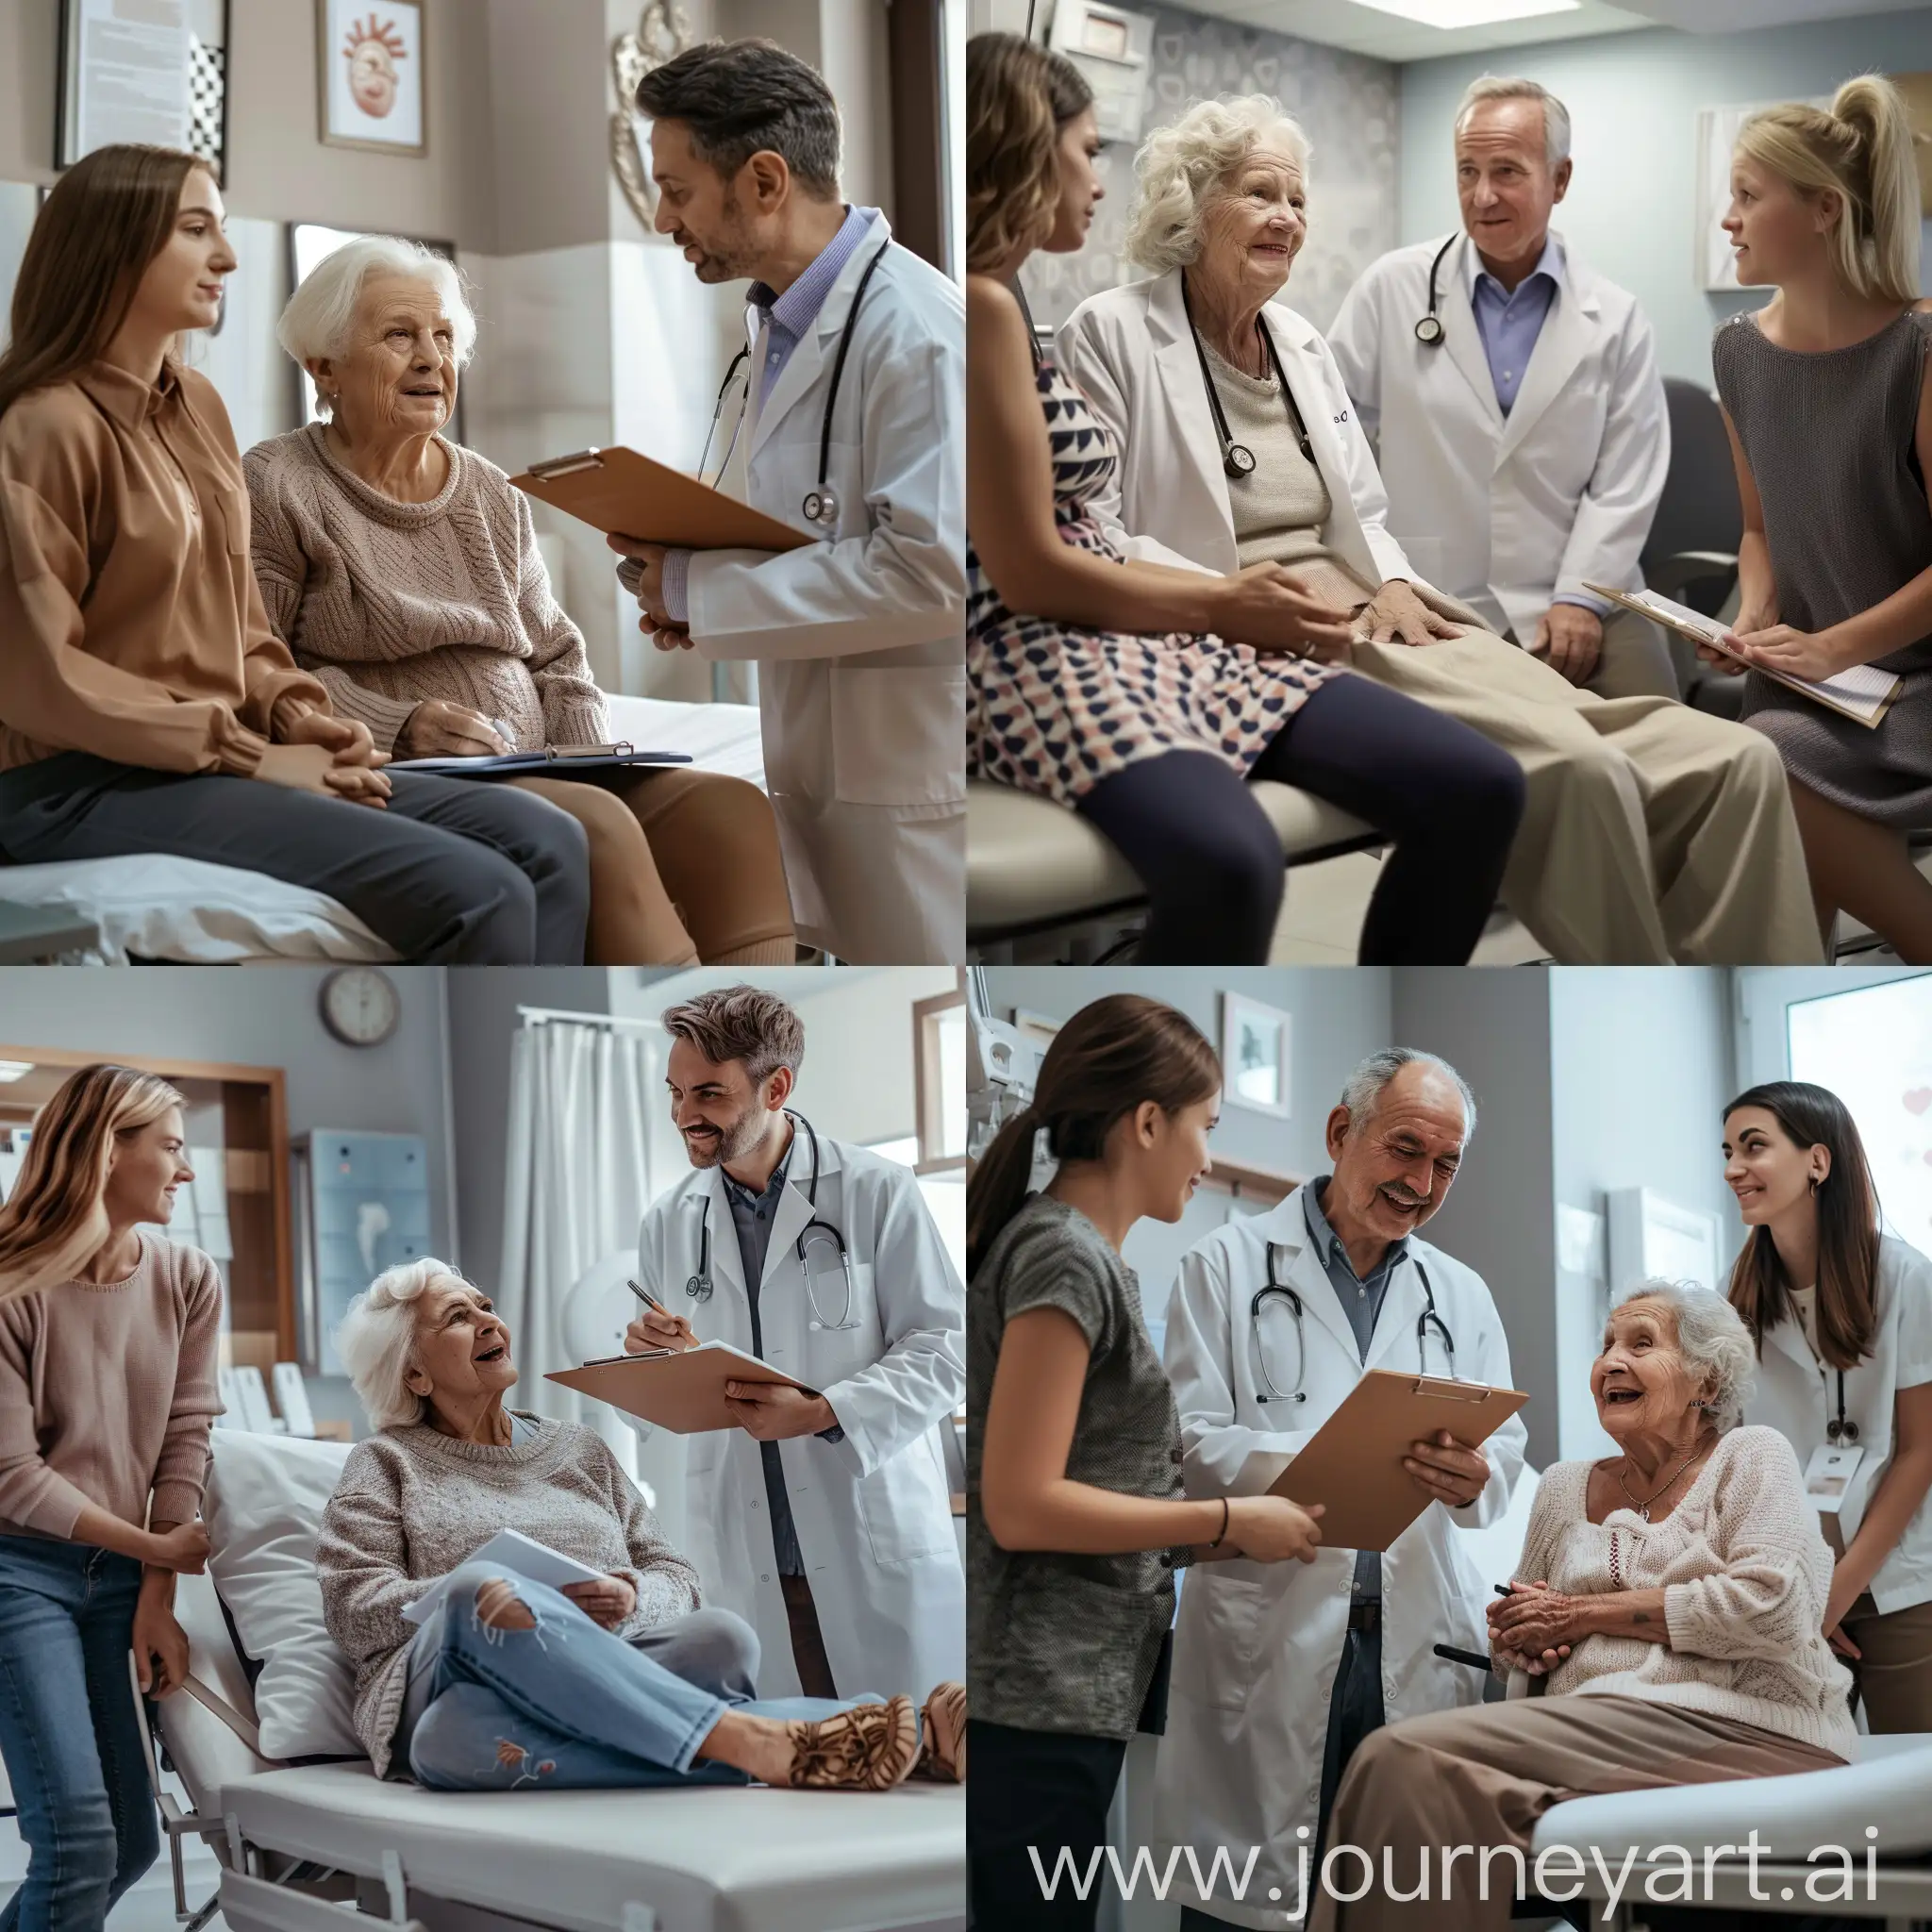 Elderly-Woman-Finds-Joy-and-Relief-in-Cardiologists-Office-Consultation